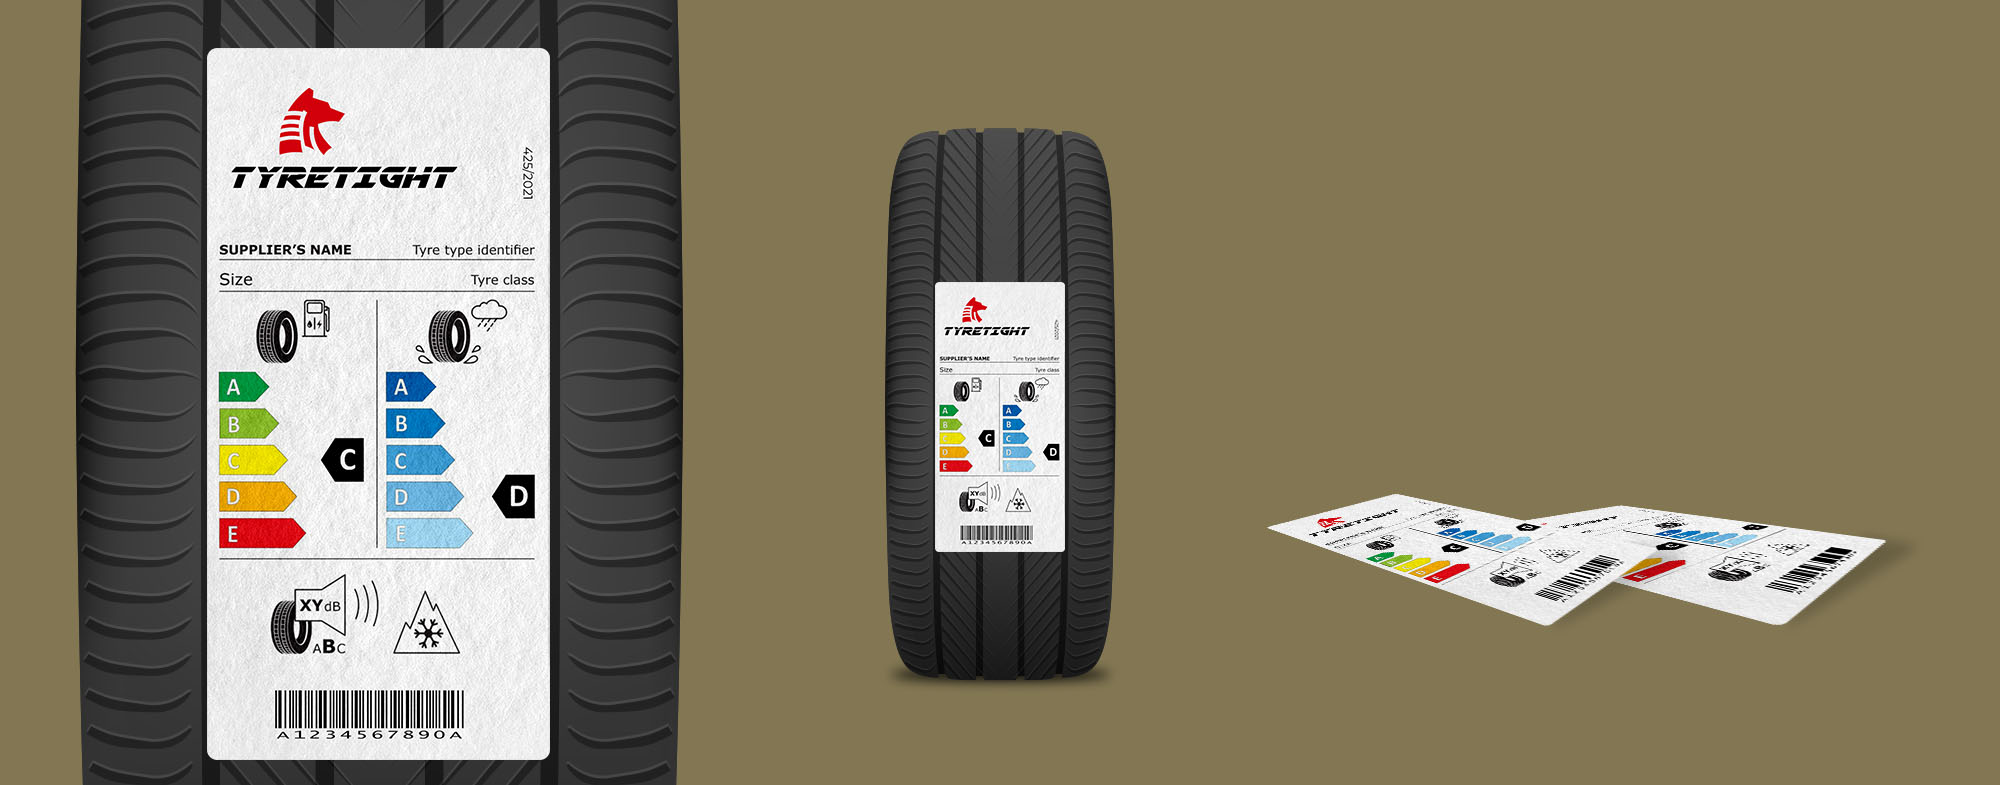 Tyre labels & tyre stickers that withstand extreme load stress.